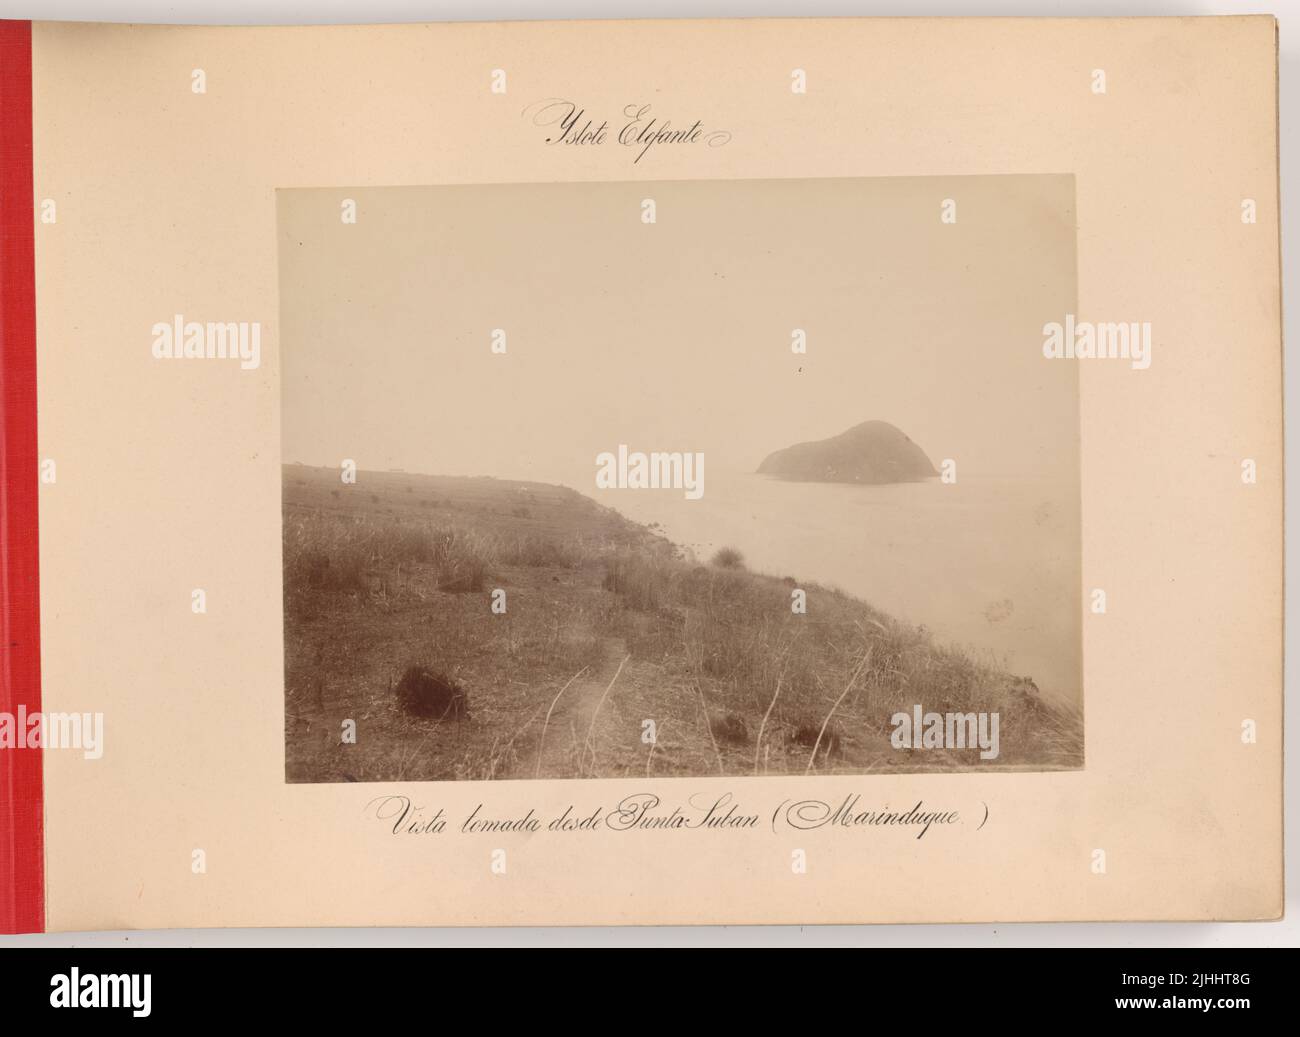 Misc - Ysolte Elefante. Presented to Major Charles McClure, Paymaster, U.S.A. The Lighthouses of the Philippines, by Manuel de Iriarte. Manila, April 17, 1899. Vista tomada desde Punta Suban (Marinduque). Stock Photo